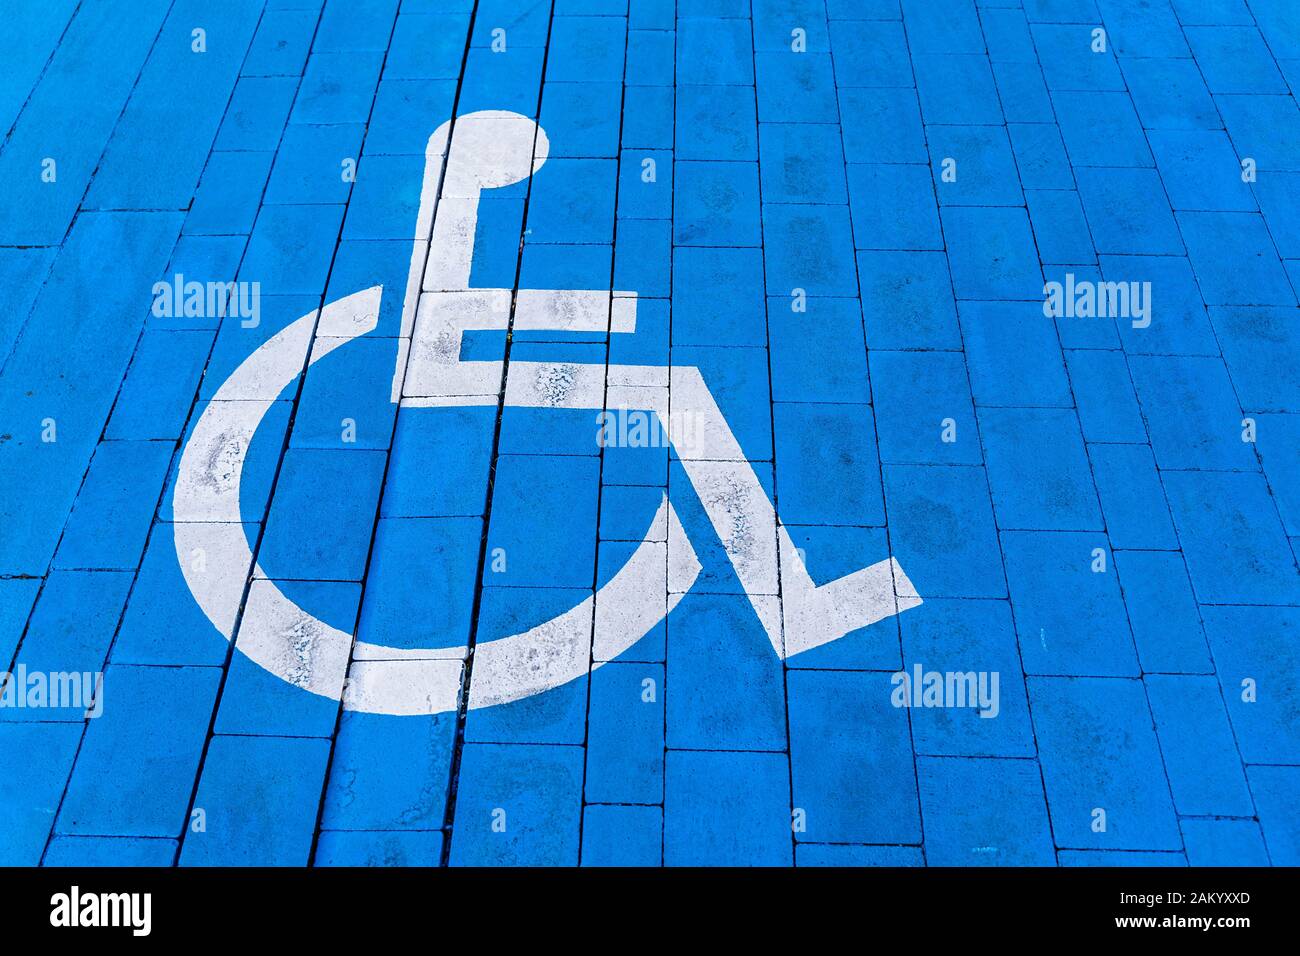 Wheelchair with information sign on brick floor, parking place for disable. White painted symbol on blue ground. Stock Photo